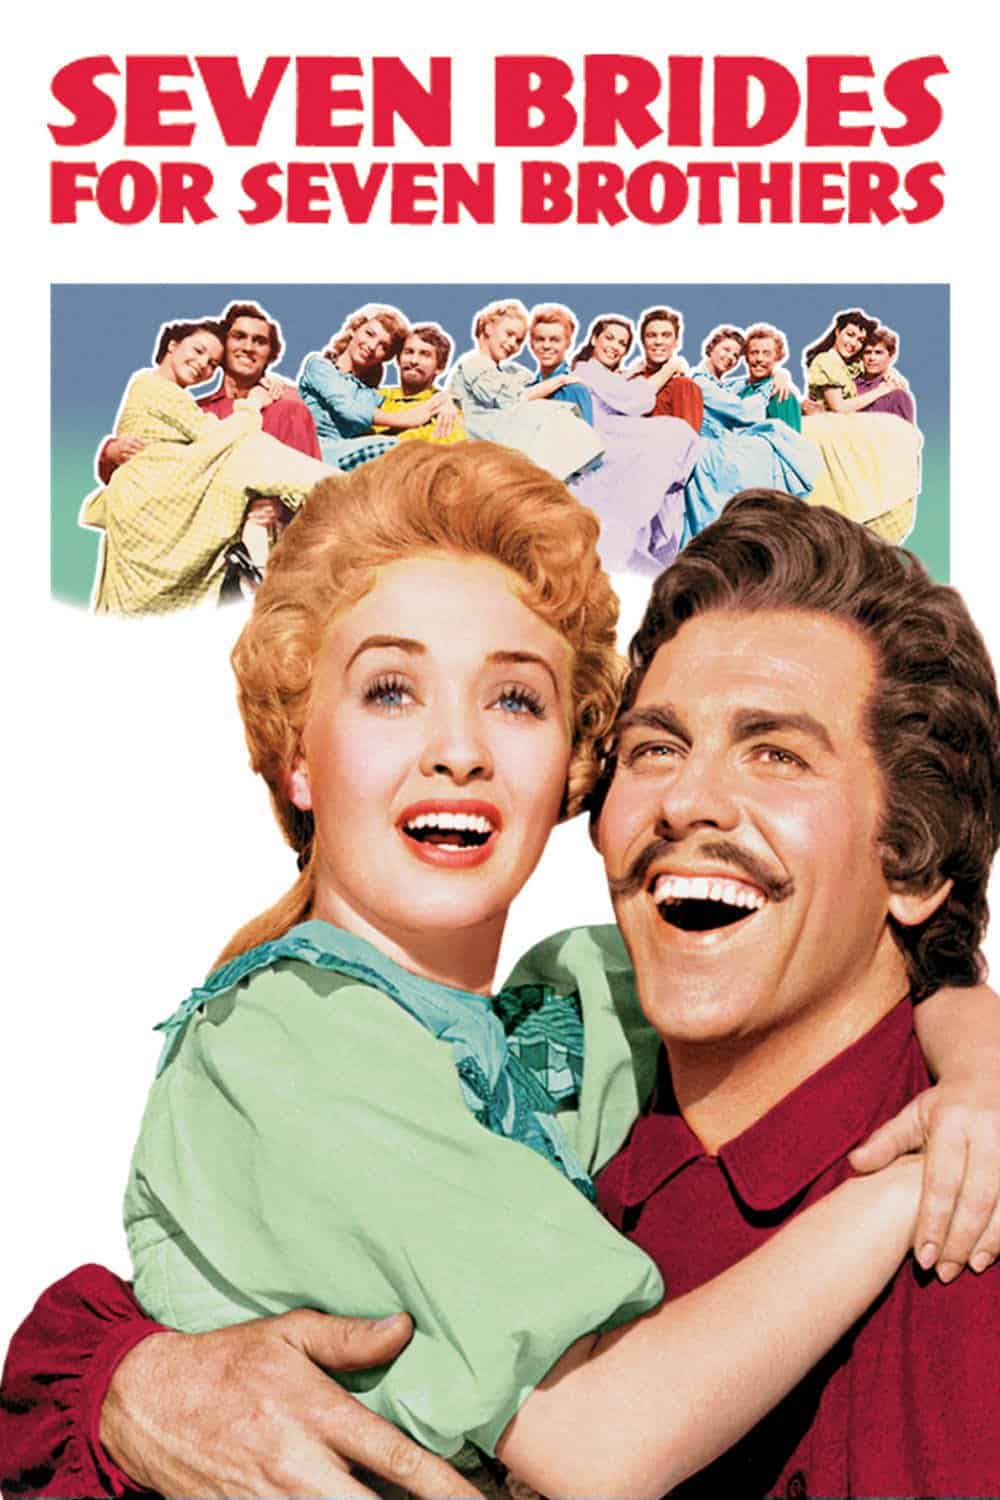 Seven Brides for Seven Brothers, 1954 